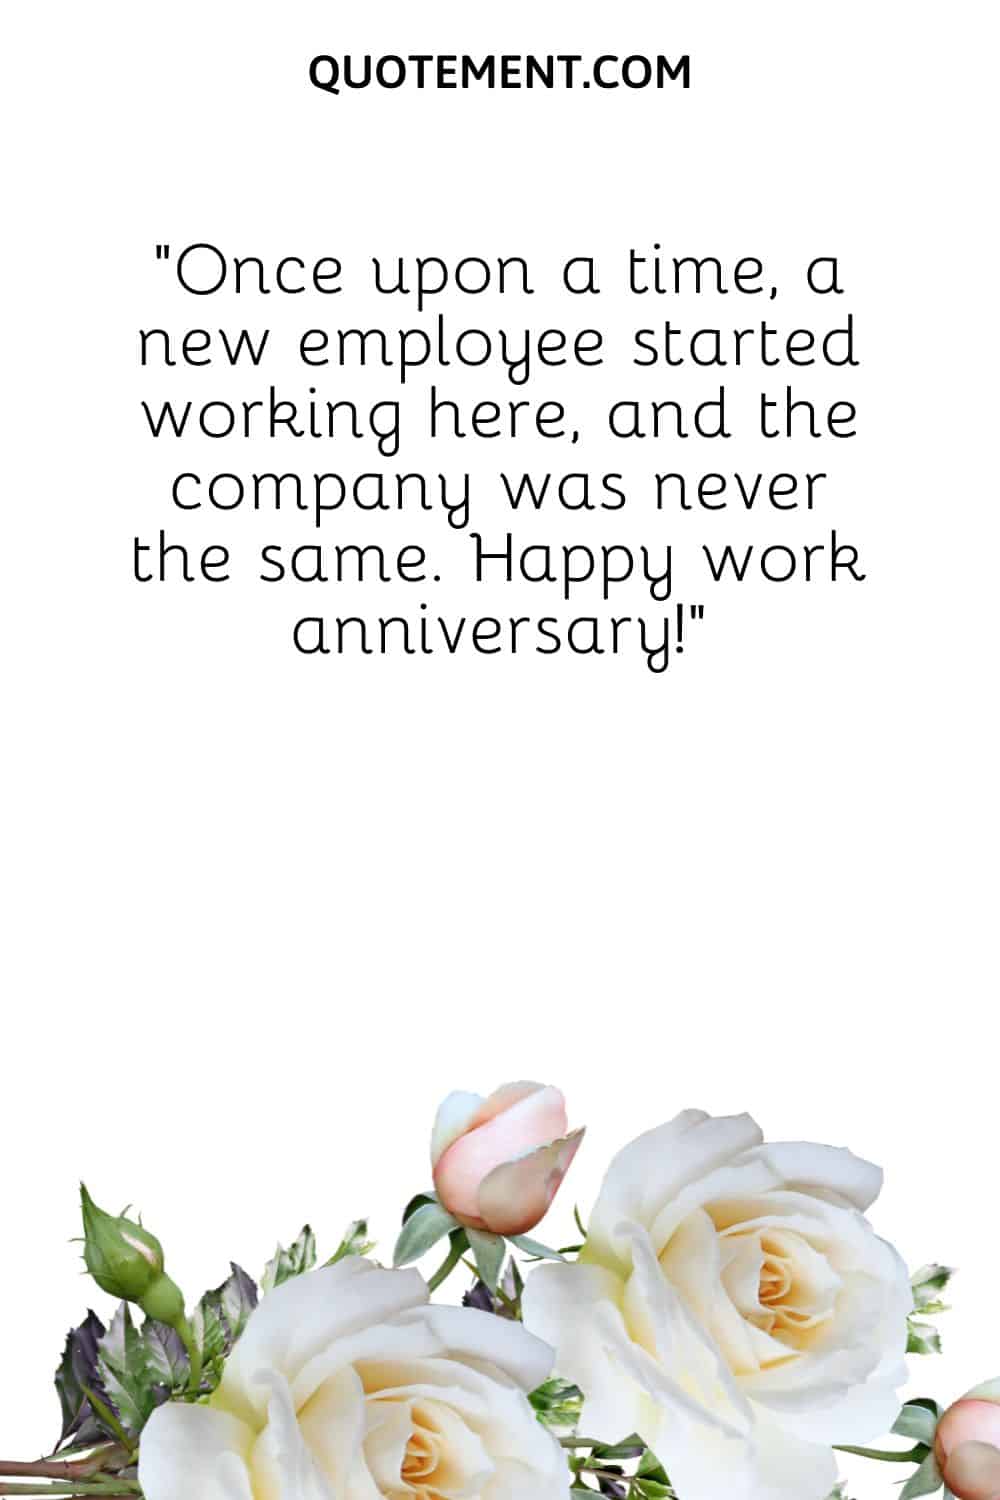 “Once upon a time, a new employee started working here, and the company was never the same. Happy work anniversary!”